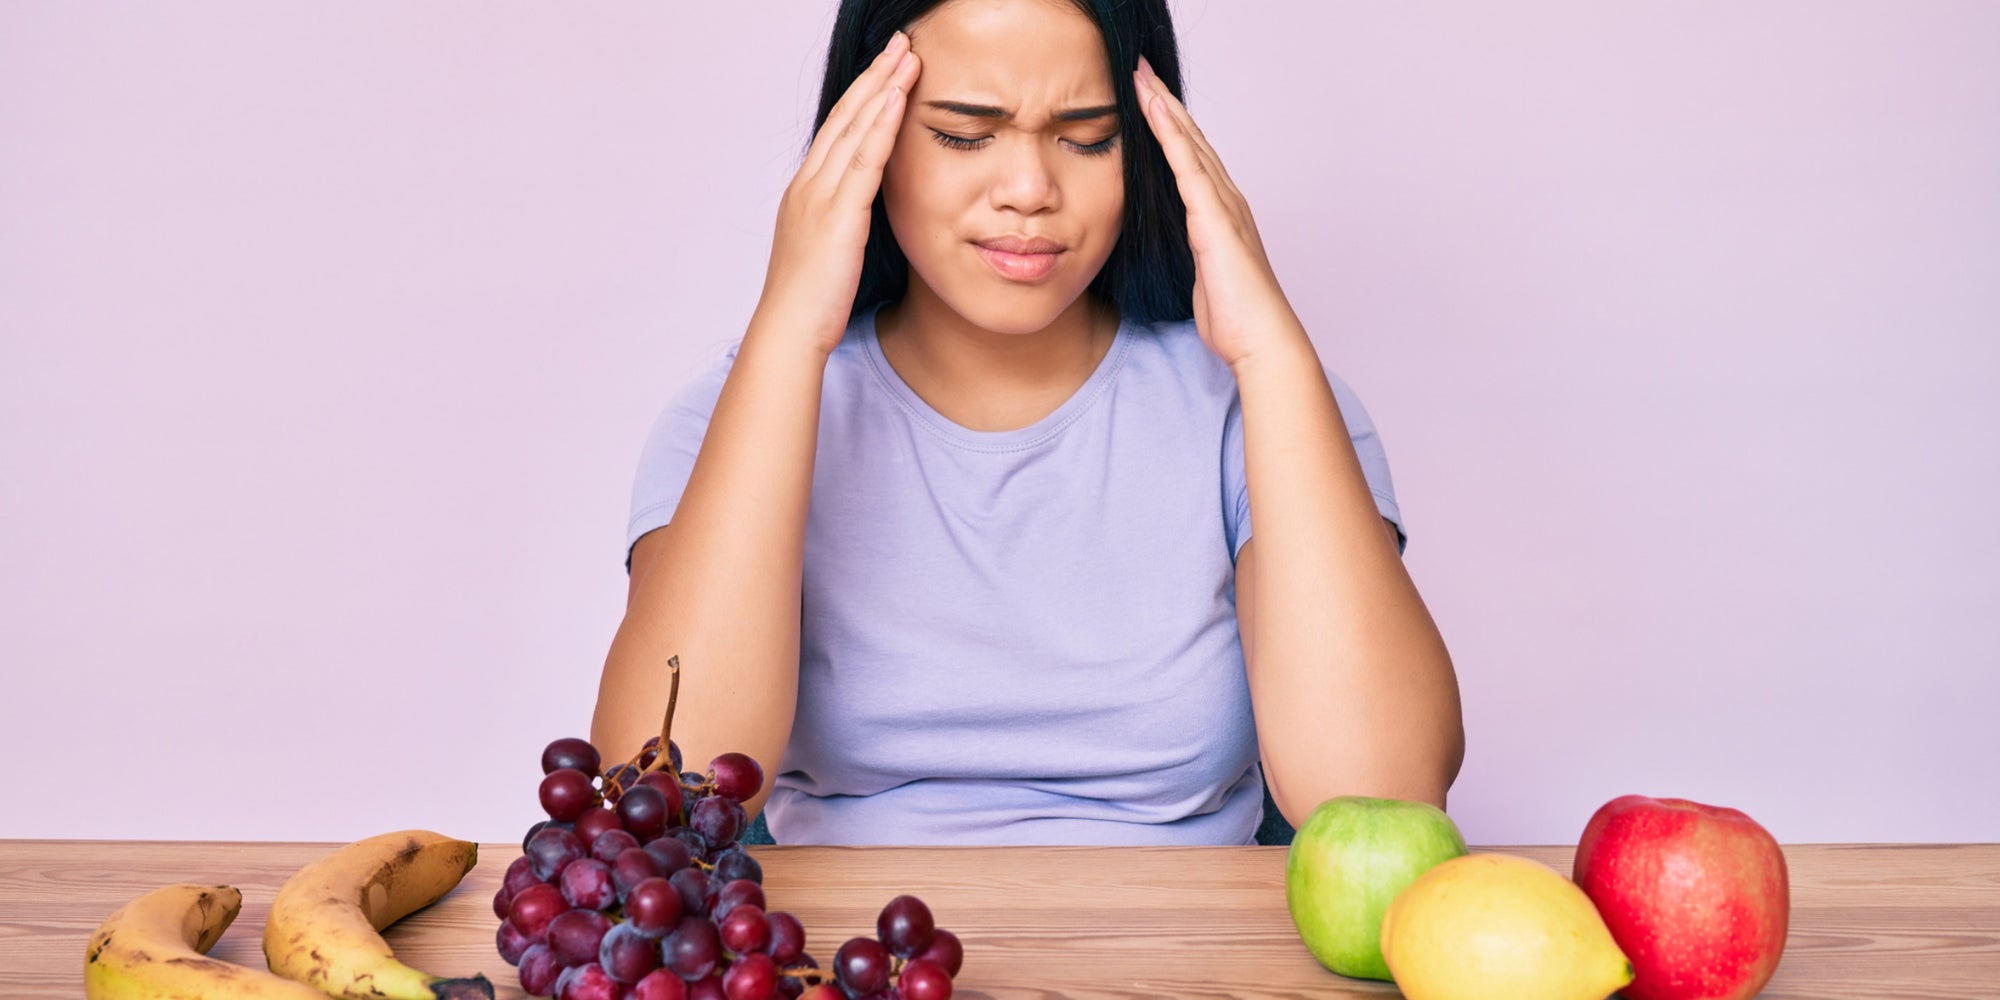 Migraine Sufferers Beware: 5 Surprising Foods That Can Trigger Attacks